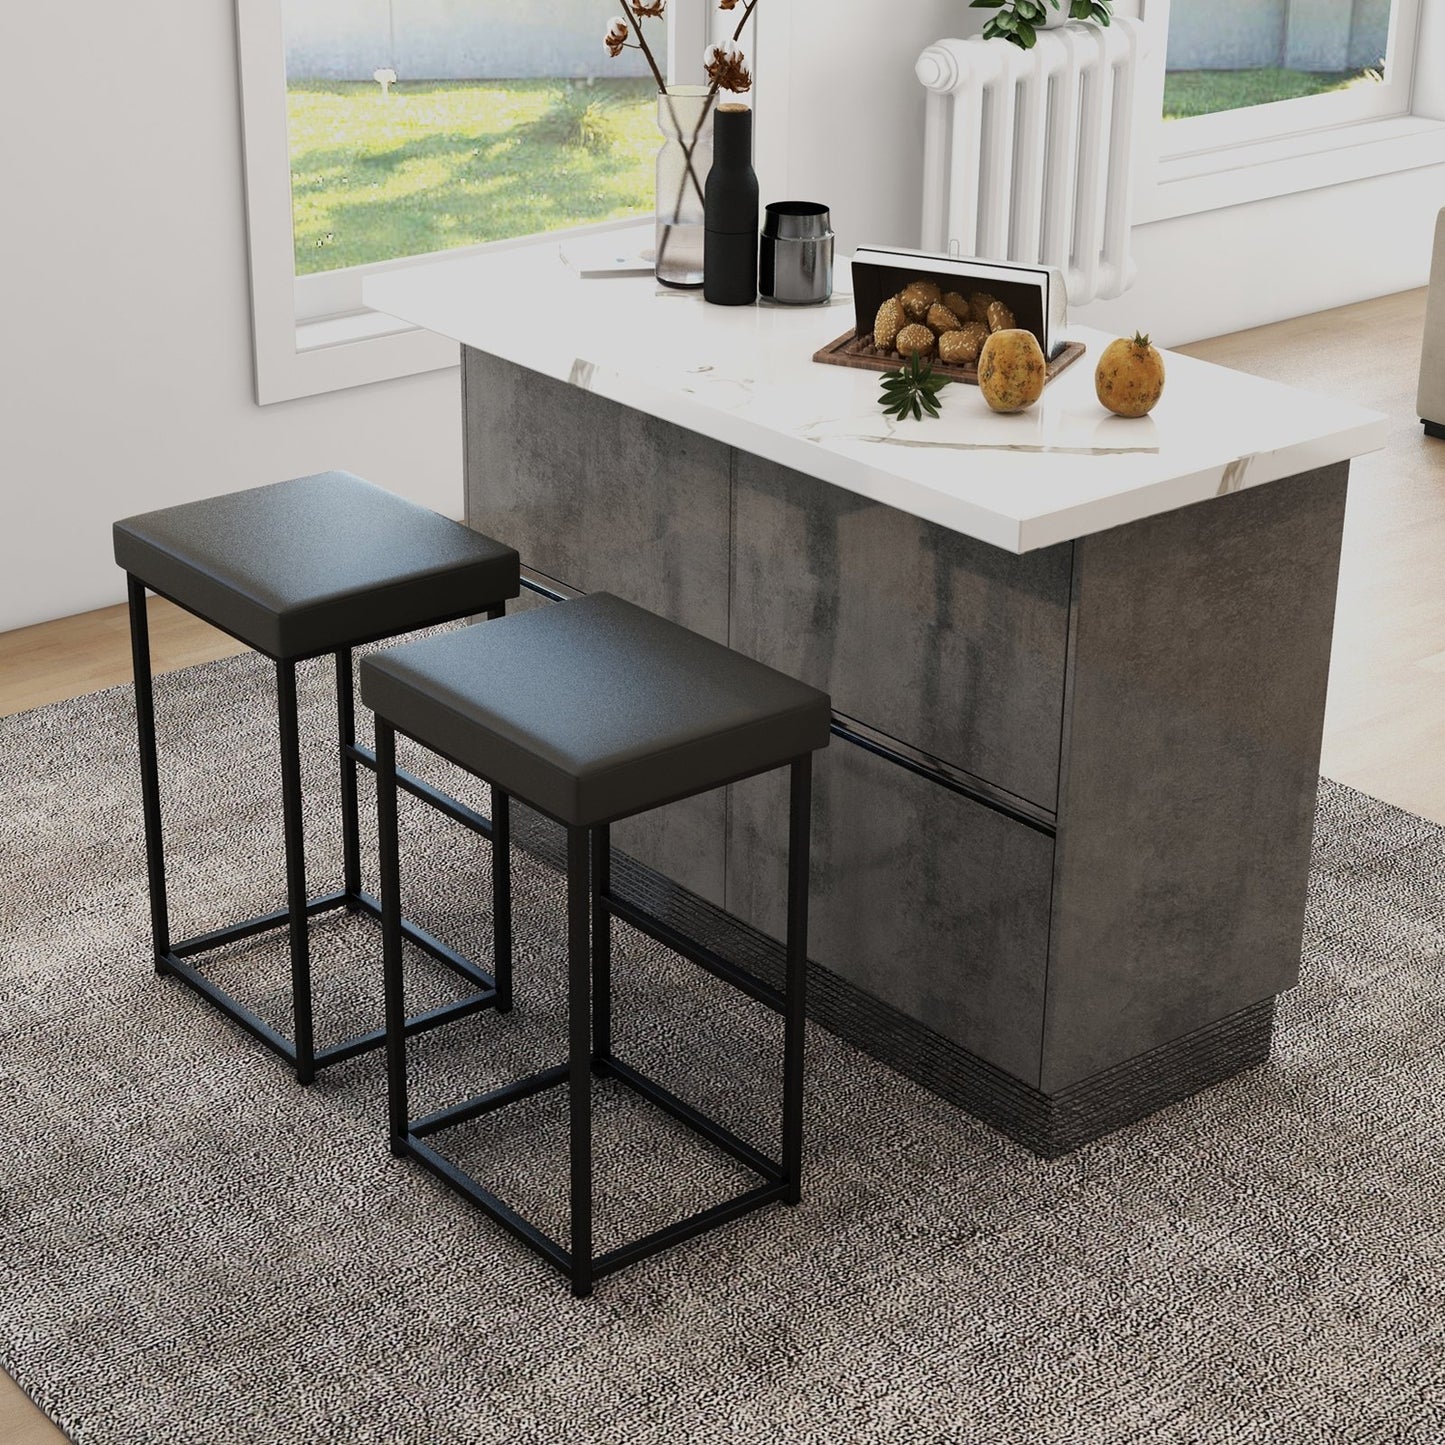 30 Inch Barstools Set of 2 with PU Leather Cover, Gray